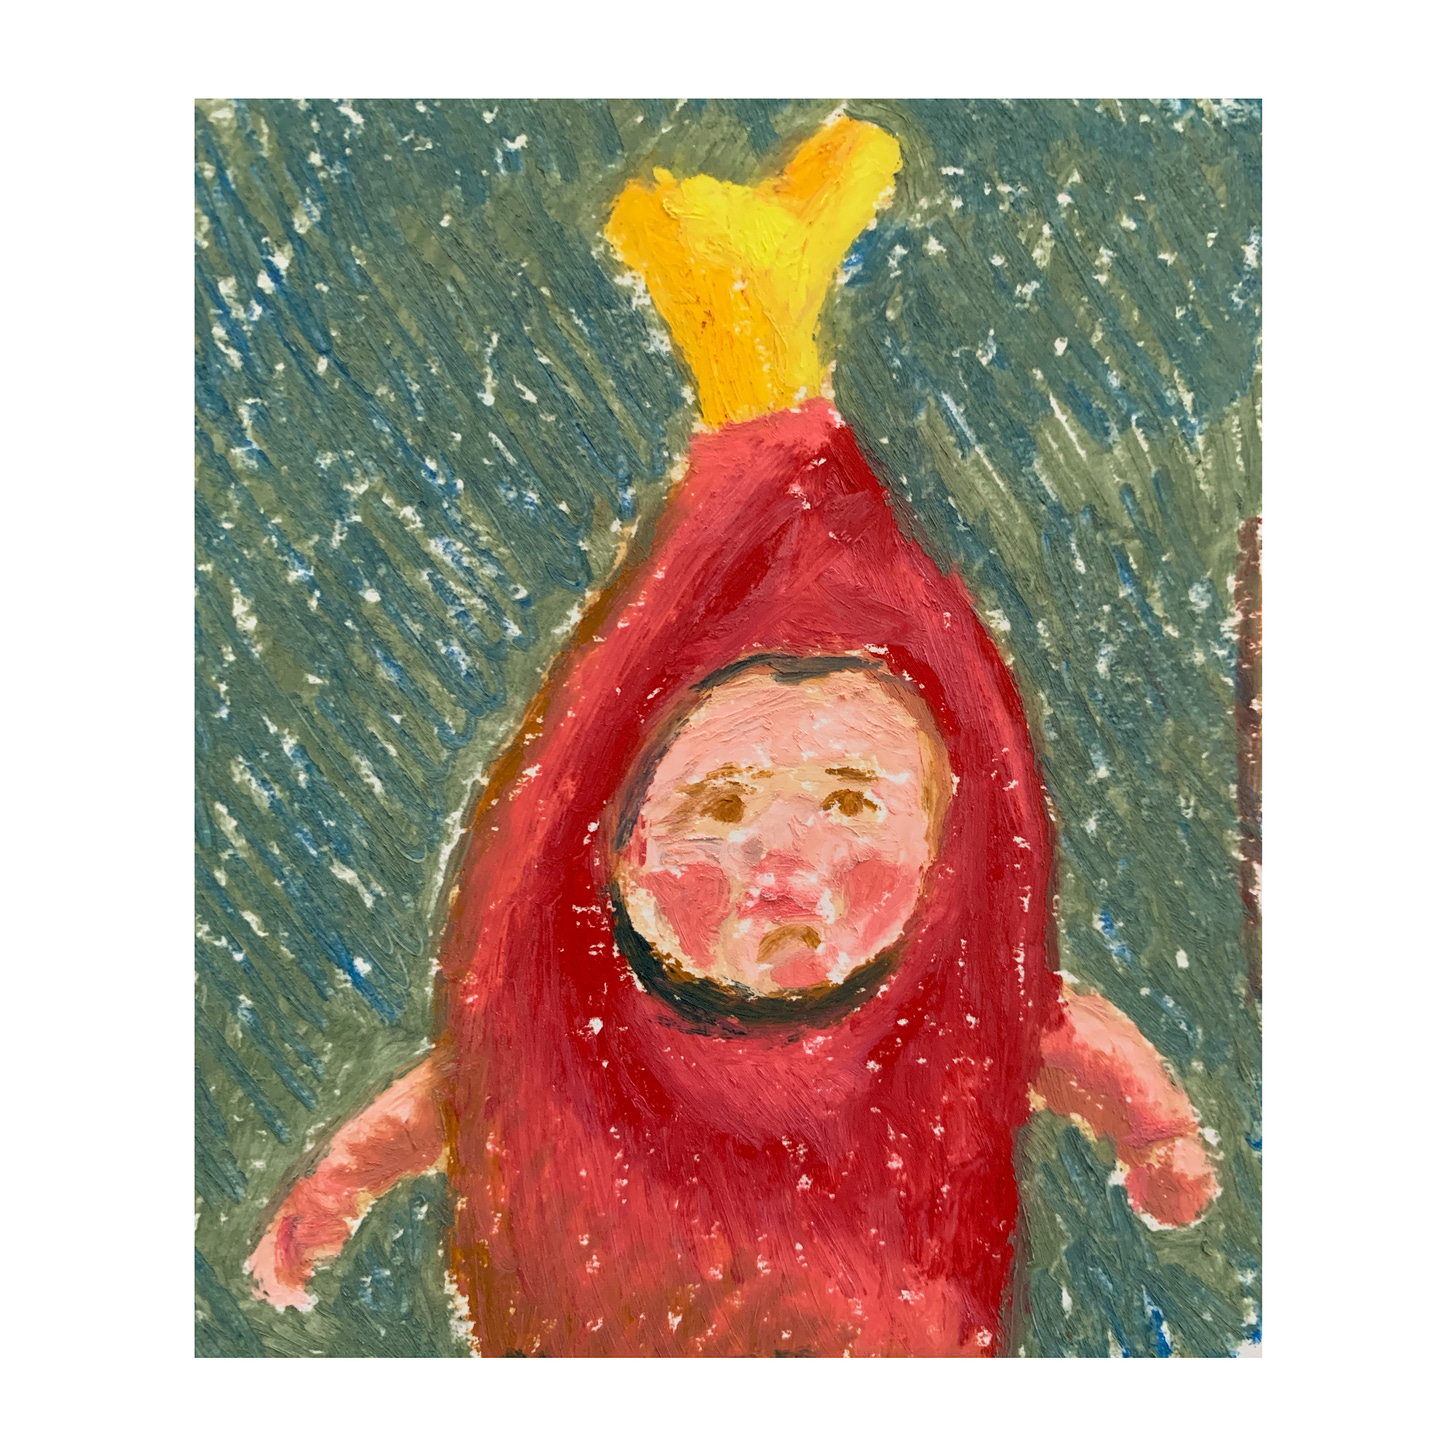 A crayon drawing of a baby in a ham costume